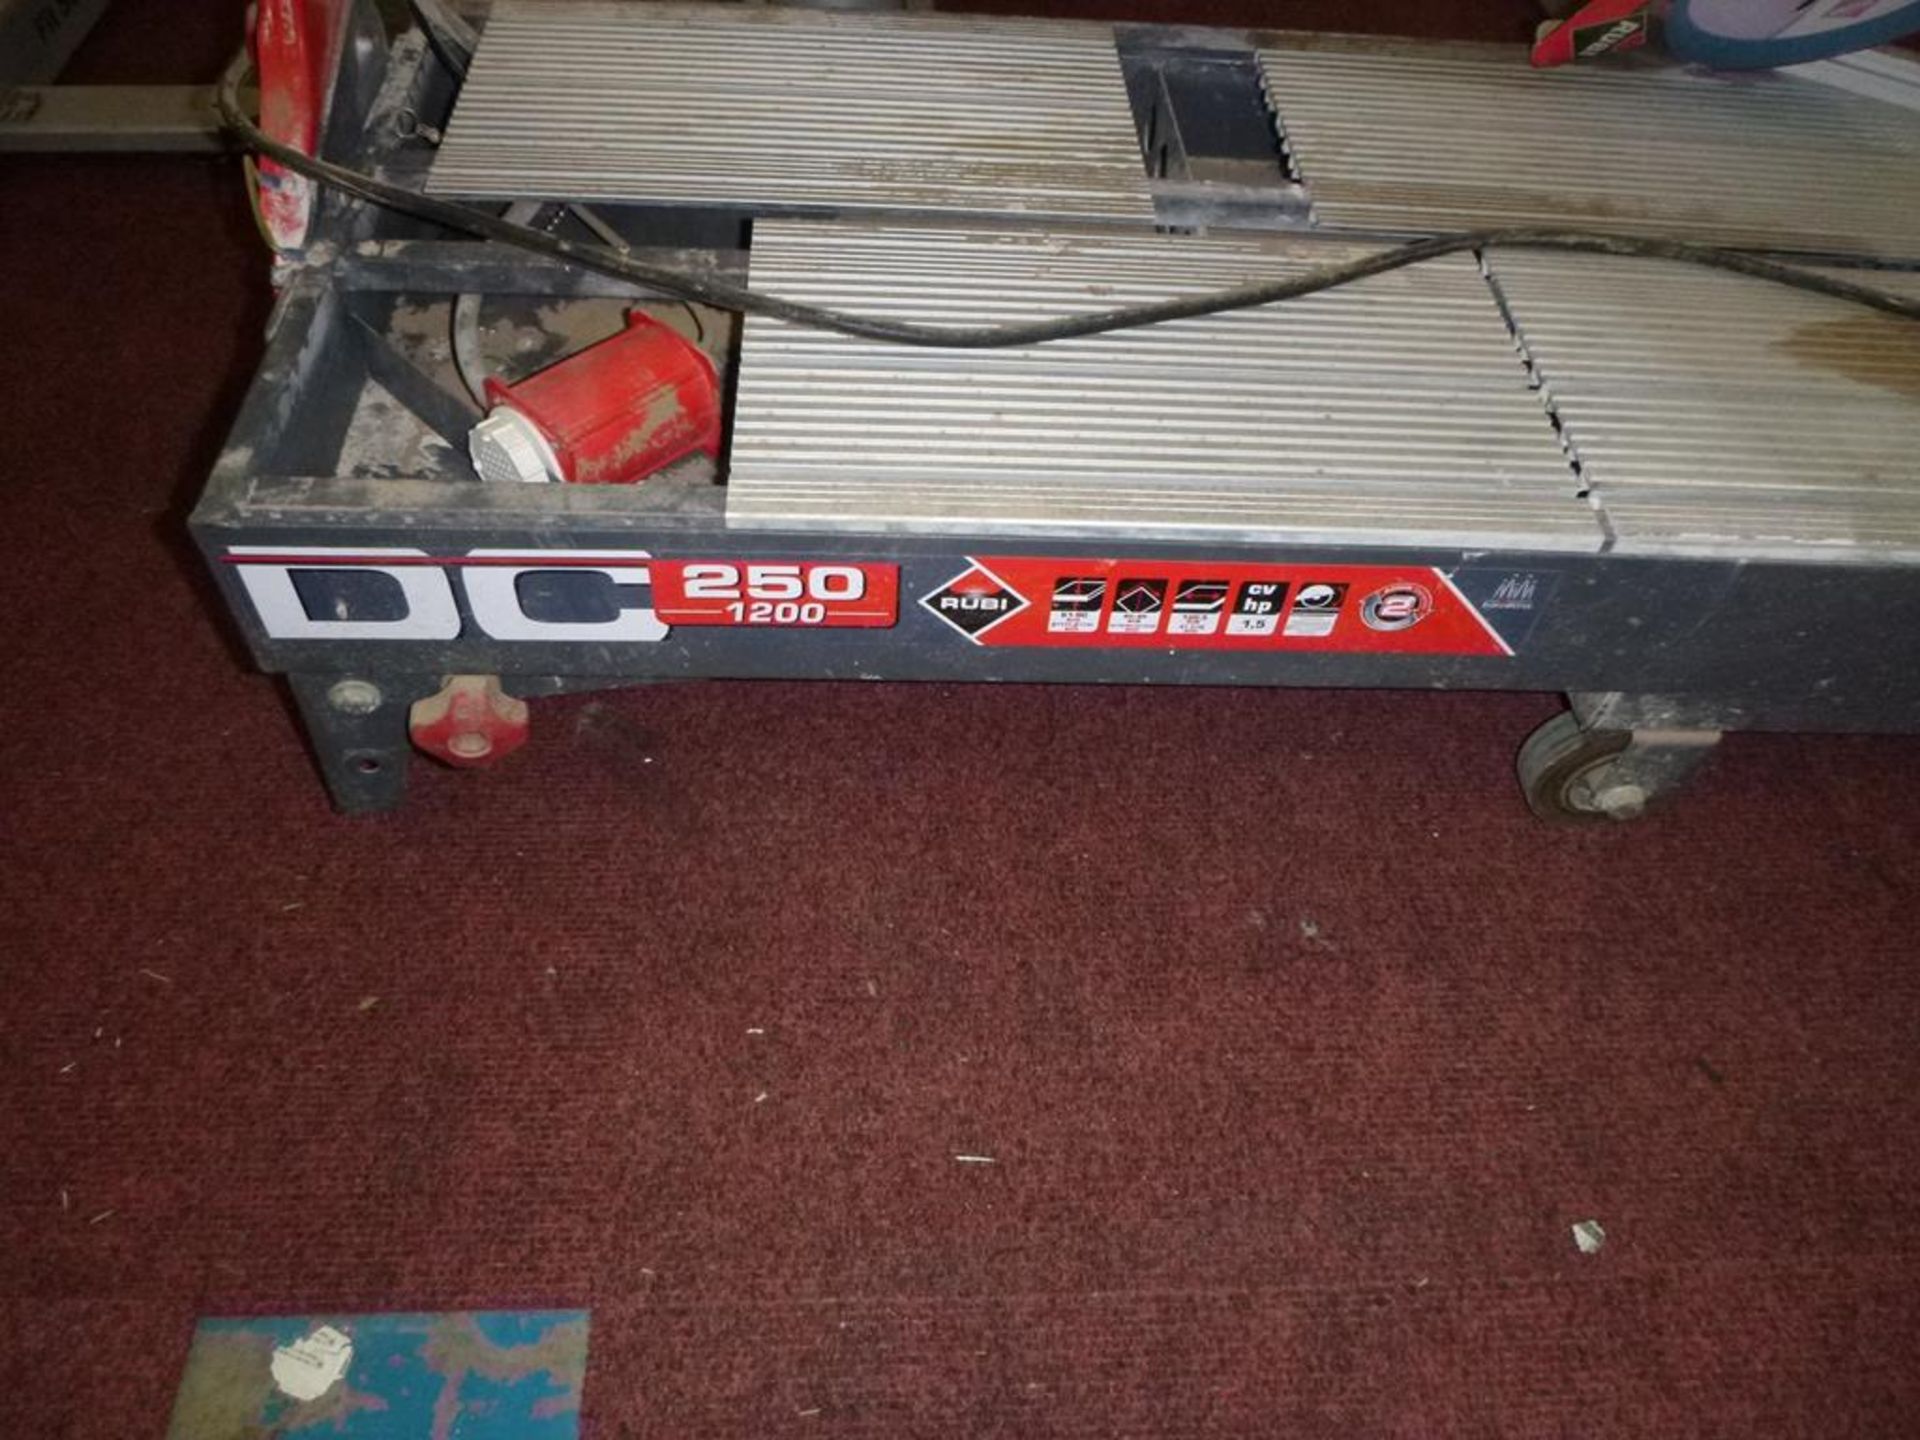 * Rubi DC 250 1200 110V Tile Cutter. Please note there is a £10 Plus VAT Lift Out Fee on this lot - Image 3 of 3